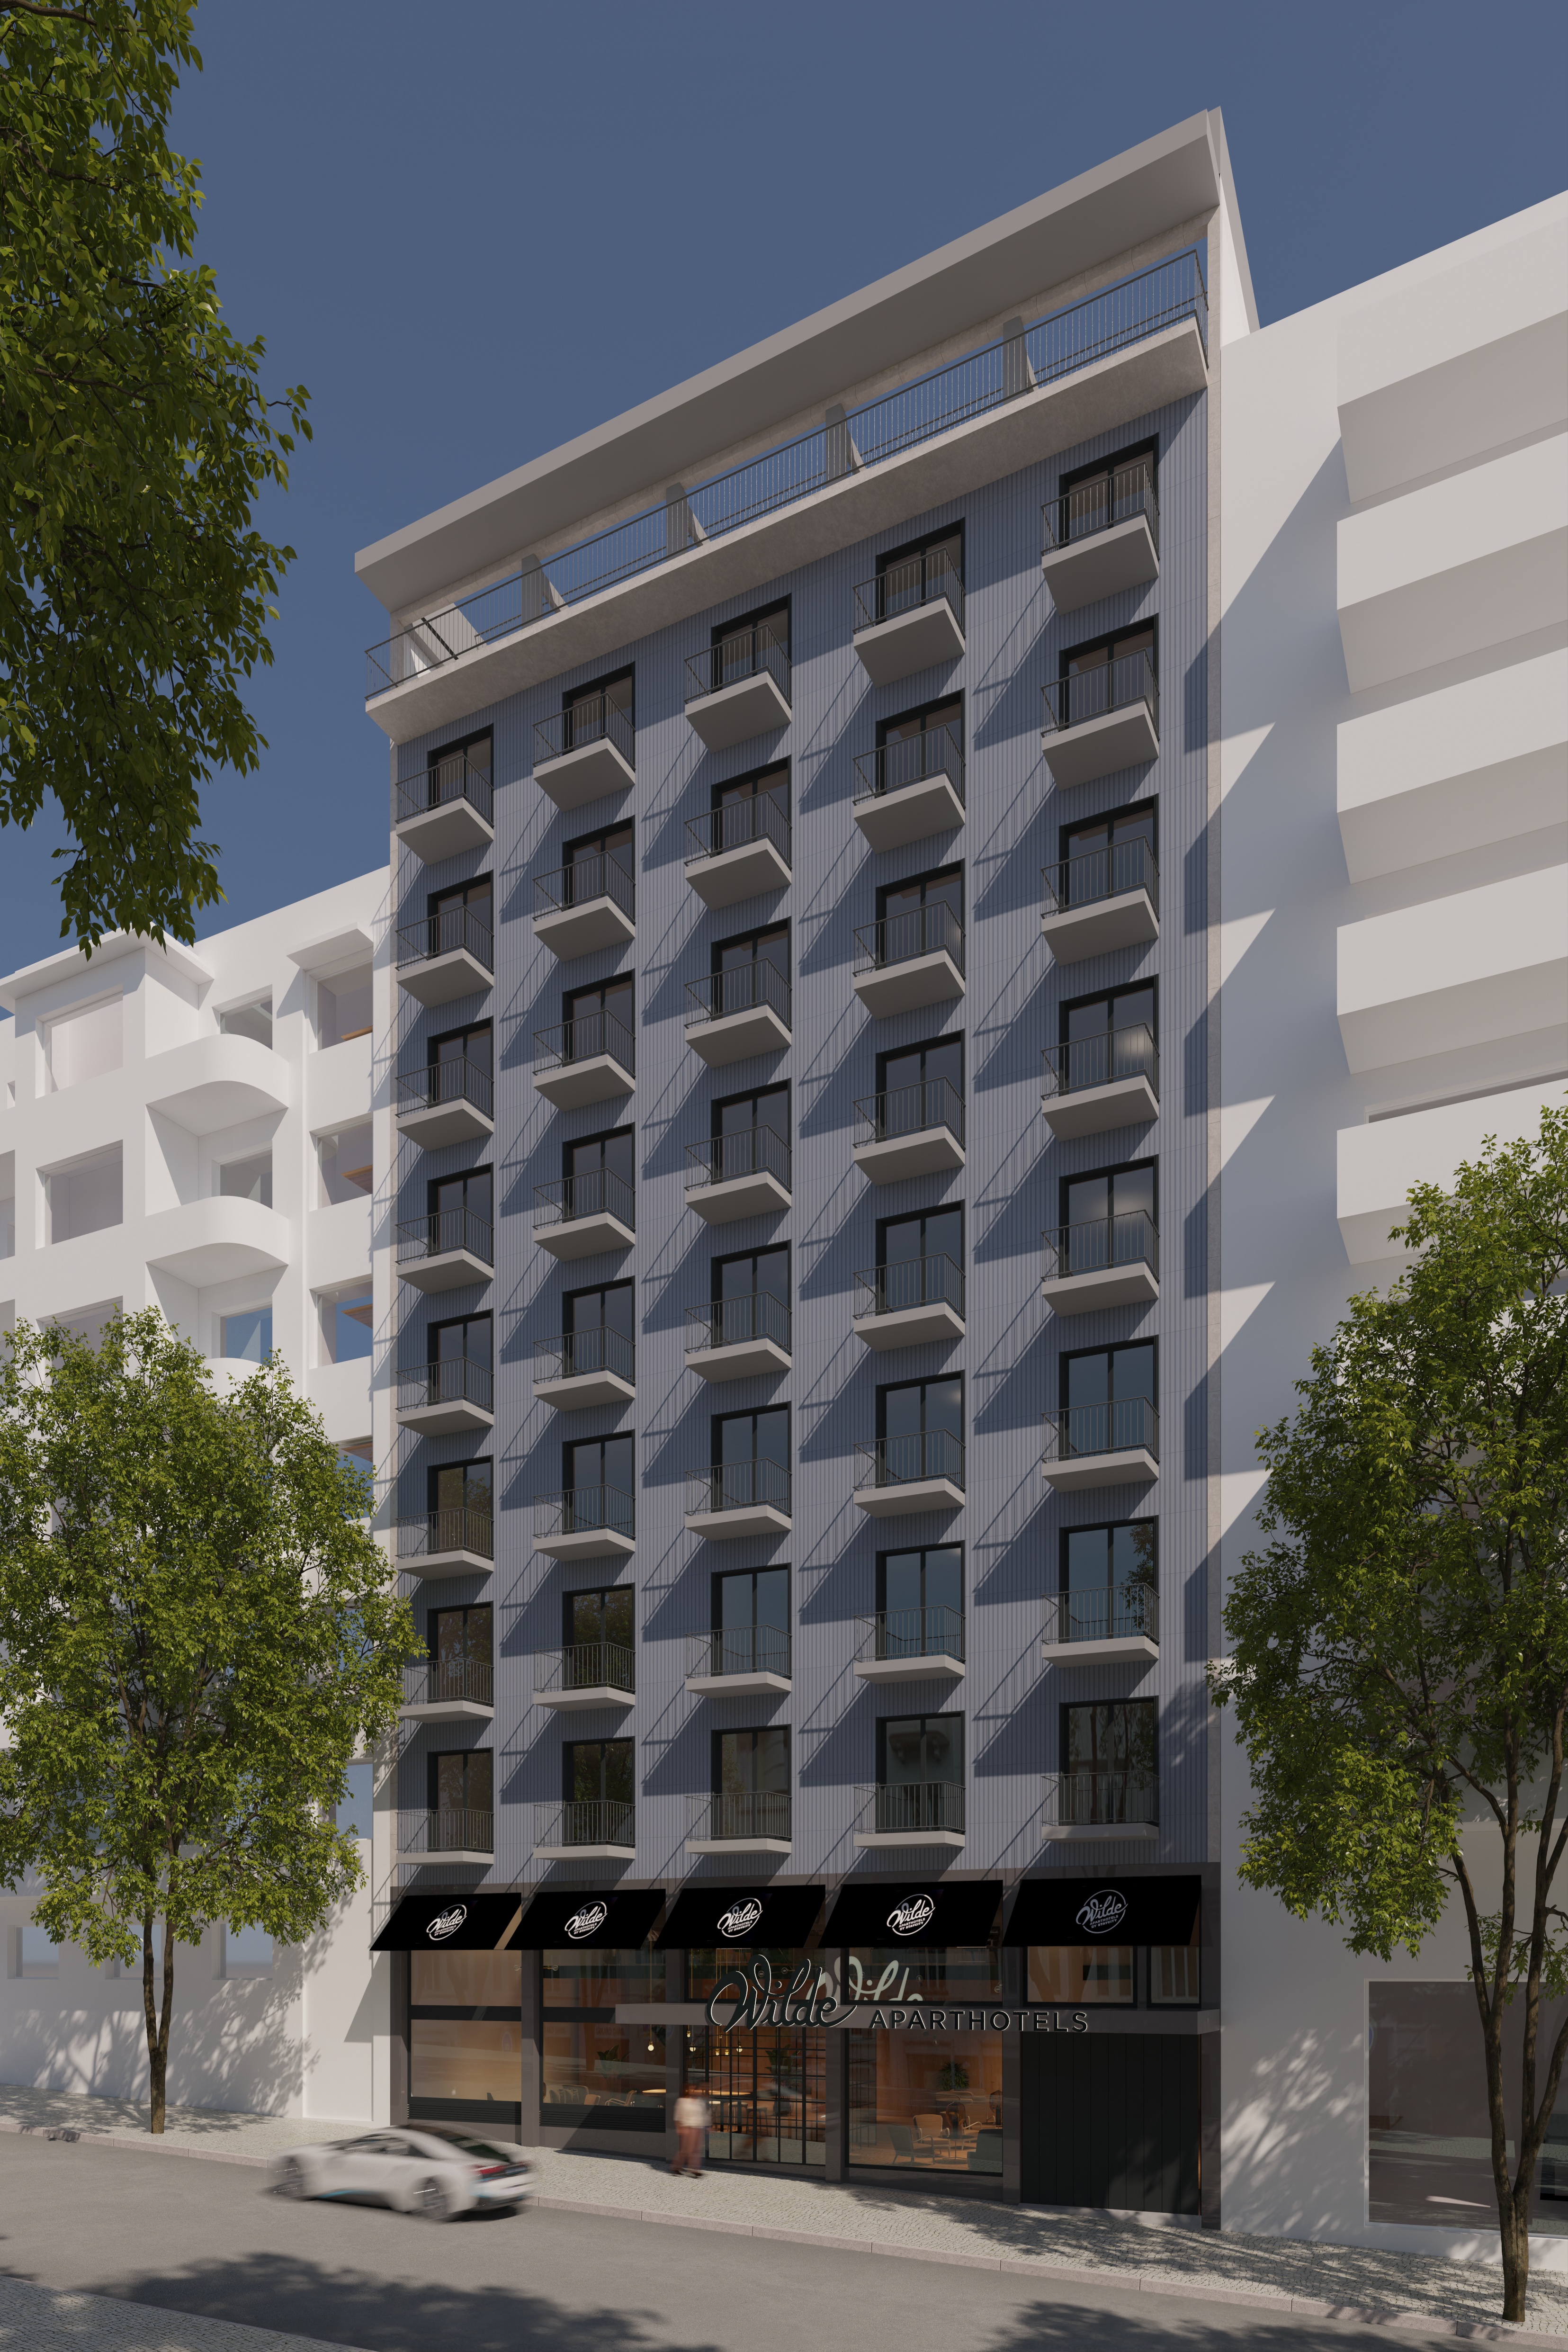 Catalyst acquires former Diplomático Hotel in Lisbon